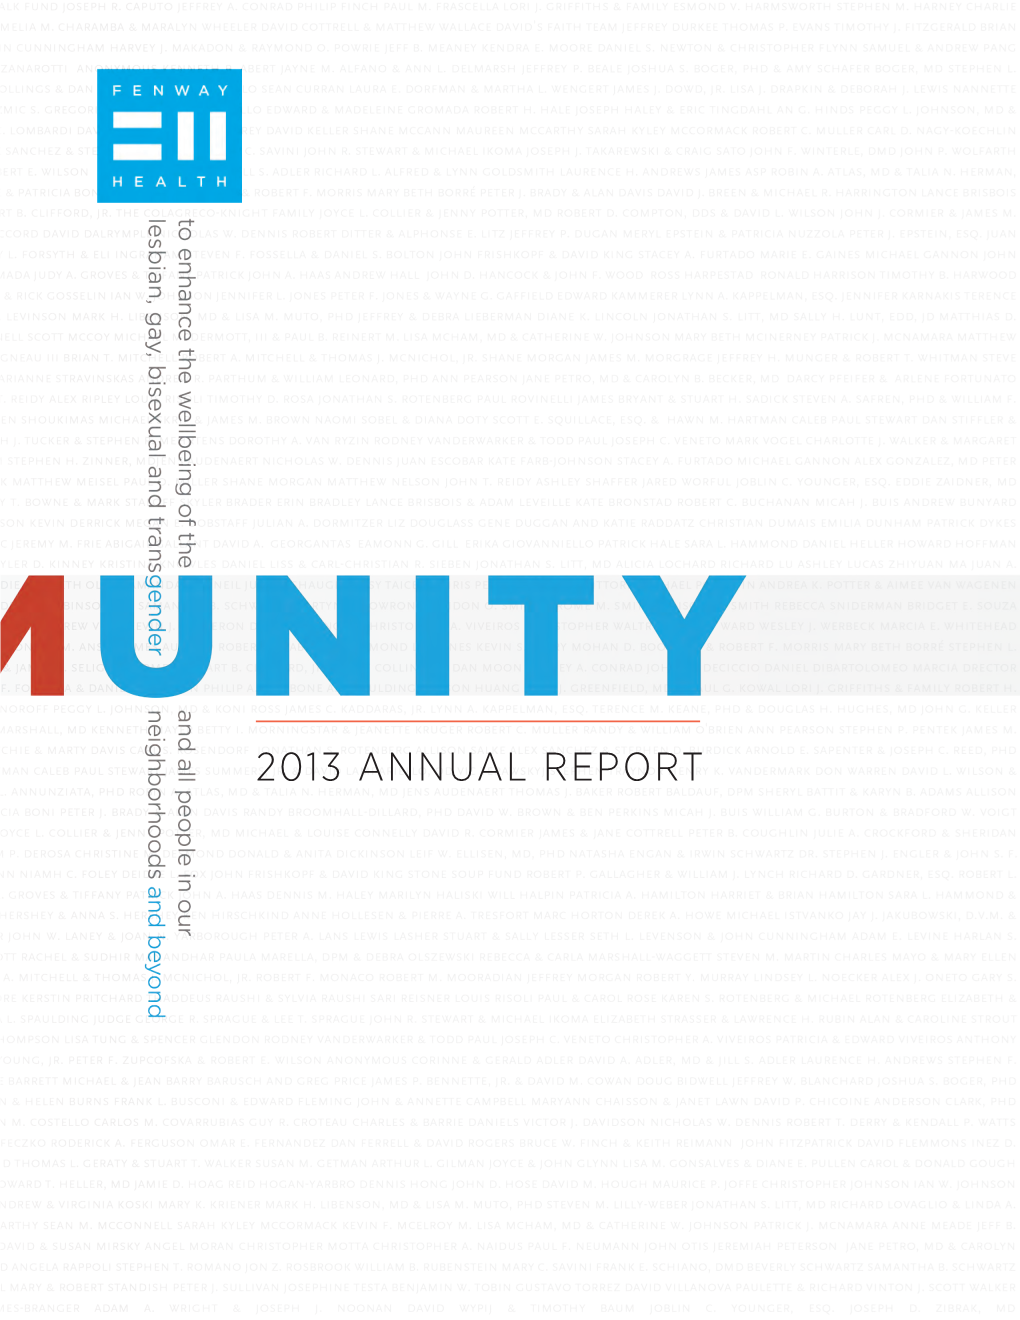 2013 Annual Report Table of Contents